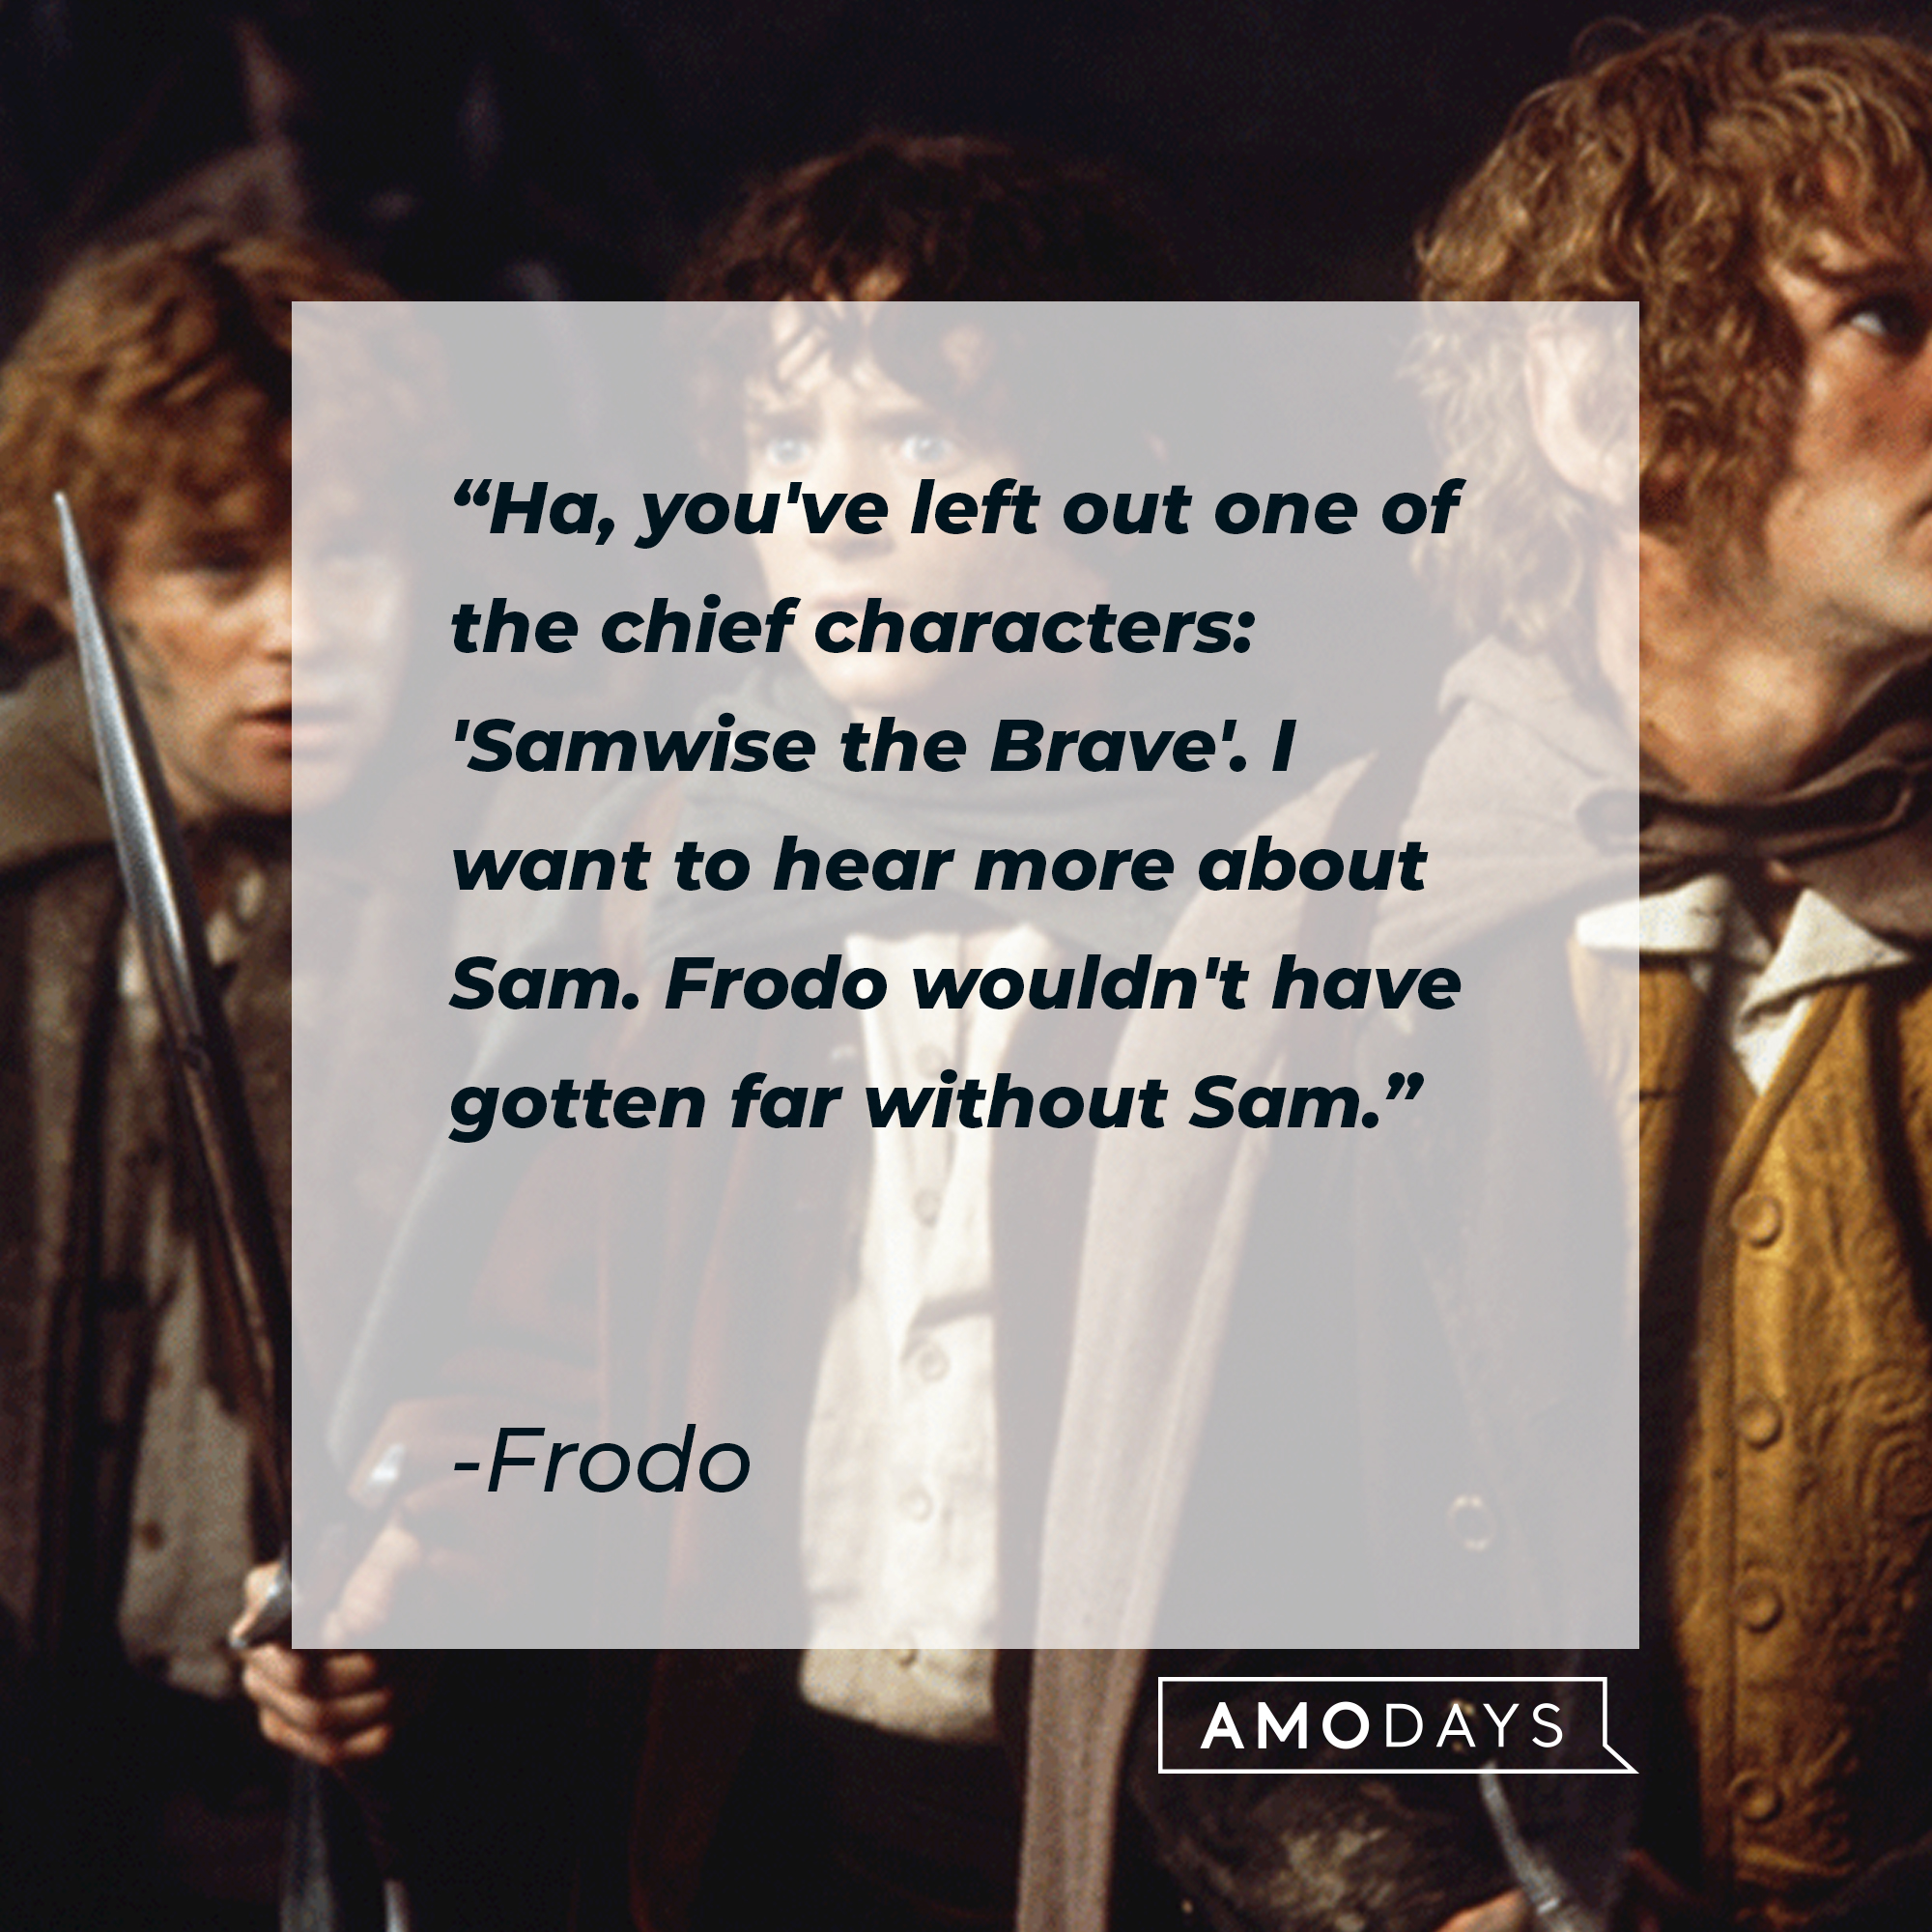 Frodo's quote: "Ha, you've left out one of the chief characters: 'Samwise the Brave'. I want to hear more about Sam. Frodo wouldn't have gotten far without Sam." | Source: facebook.com/lordoftheringstrilogy